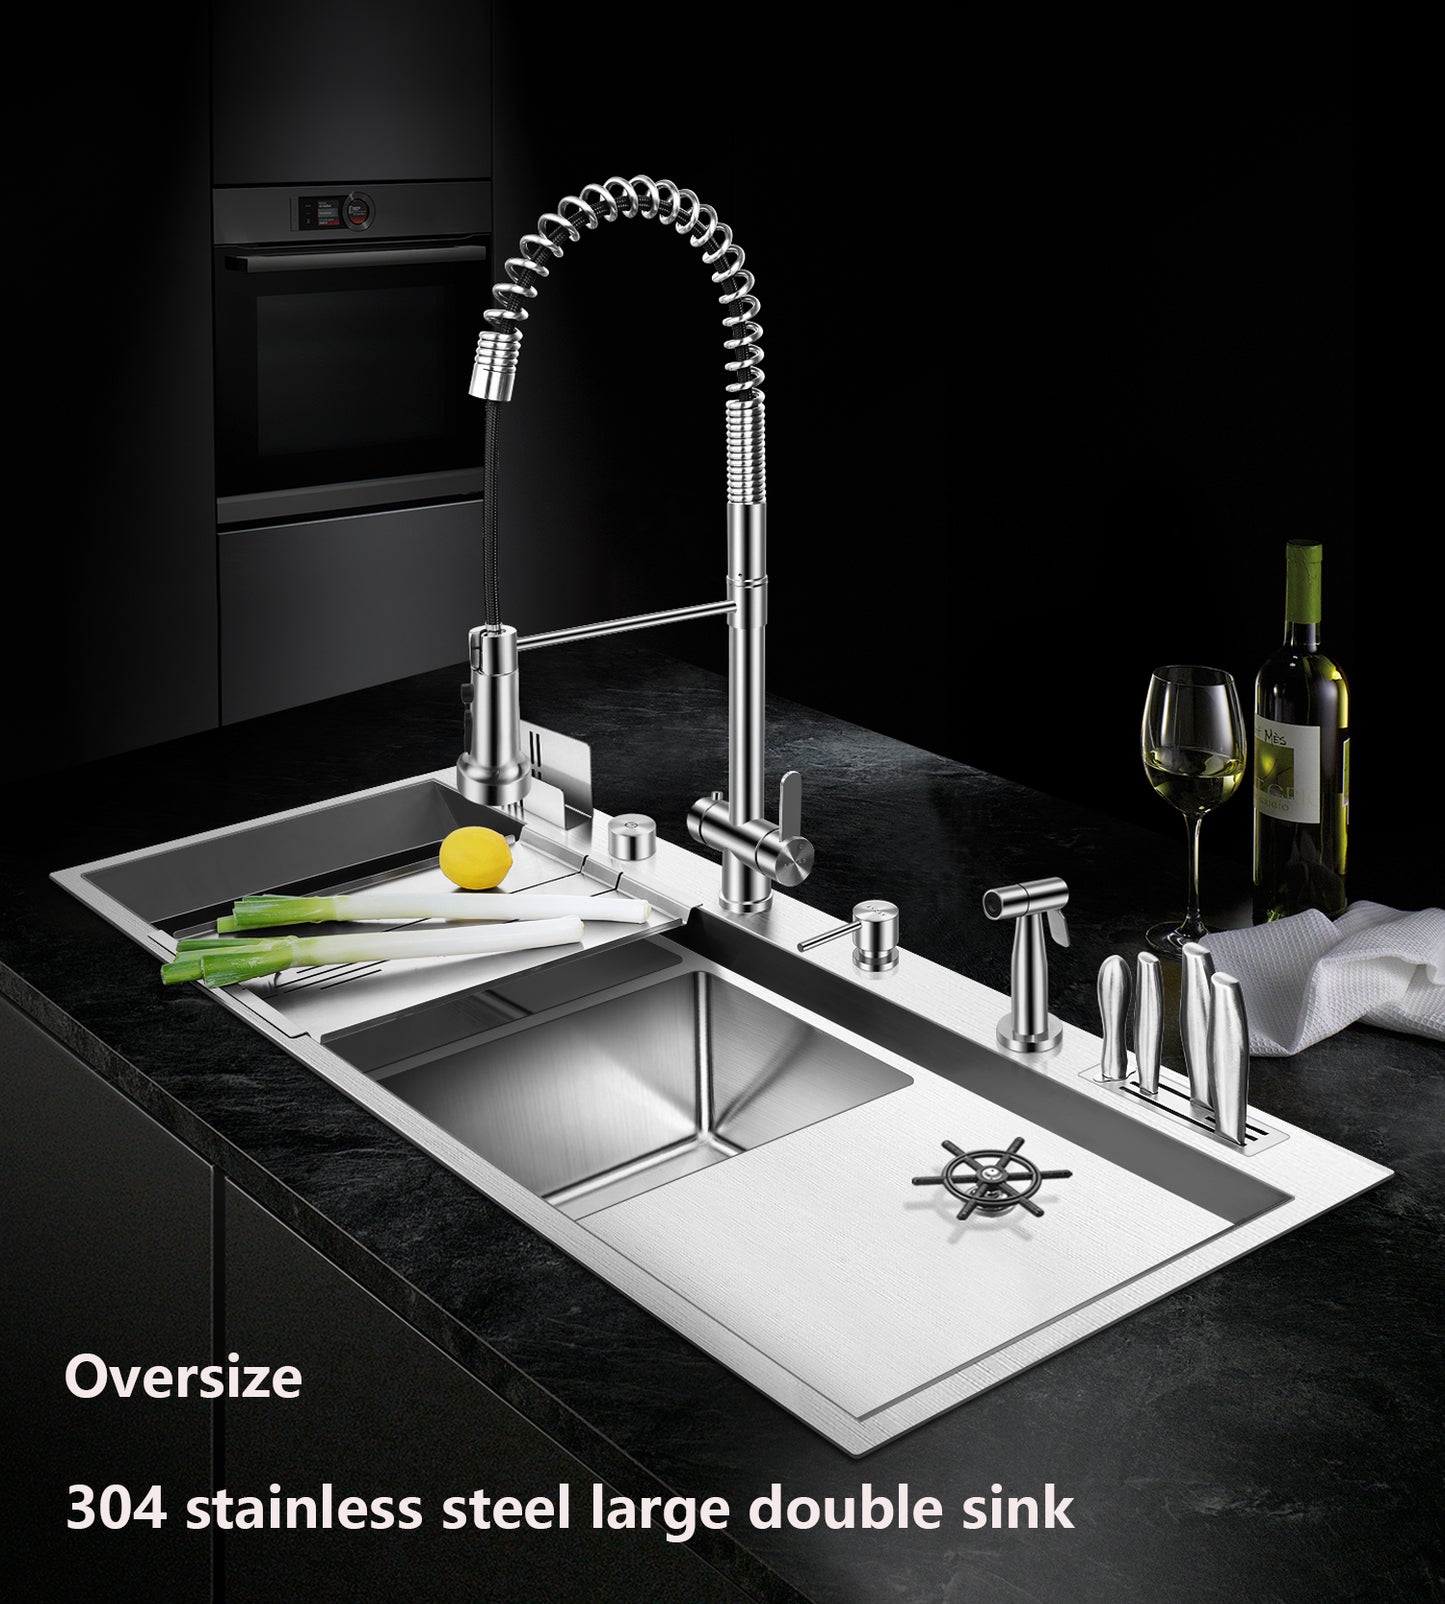 304 stainless steel kitchen sink, double sink, large size 1200x500x220mm MT-12050X ASRAS